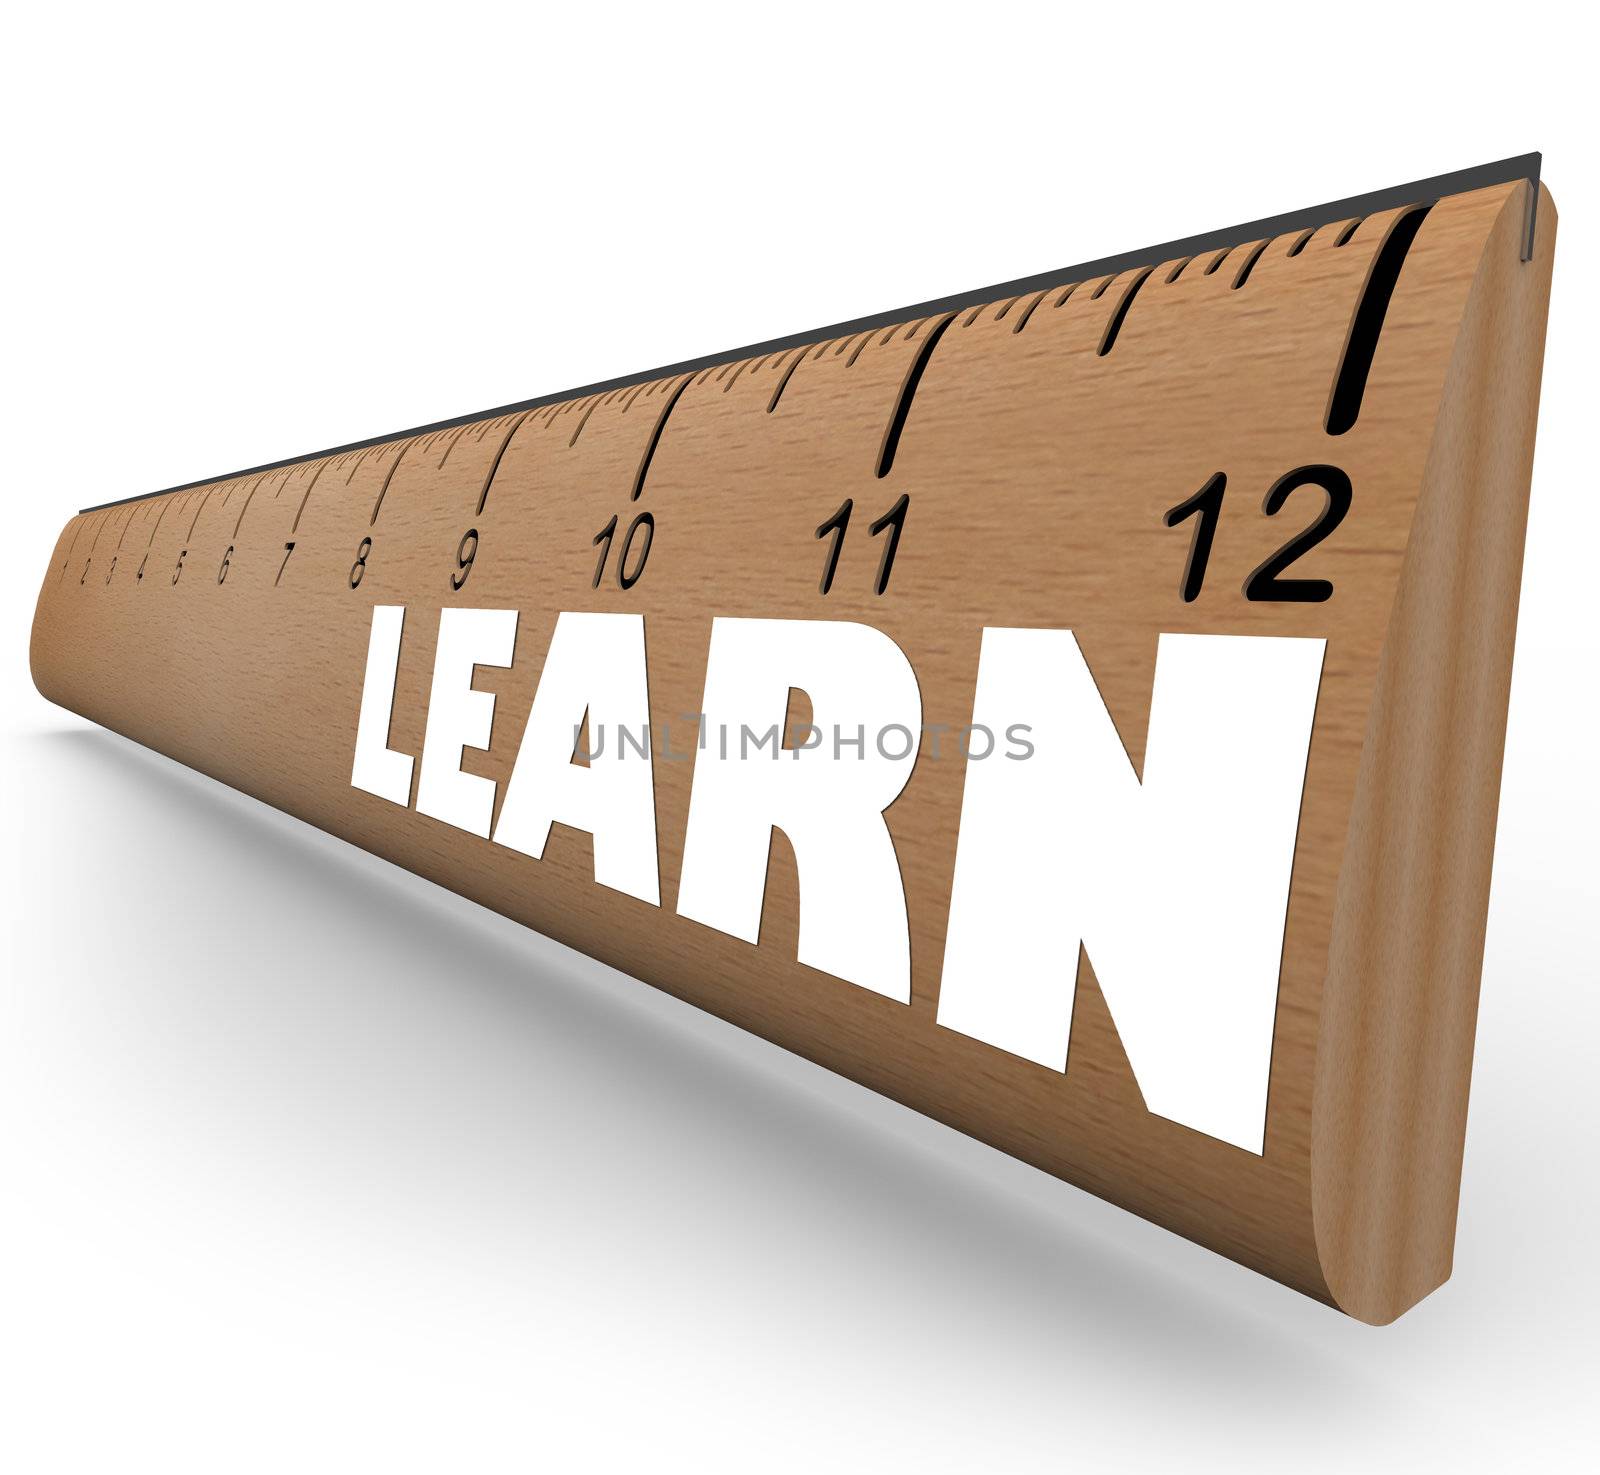 An old-fashioned wooden ruler with the word Learn illustrating the progress and growth in your education as measured in inches or feet